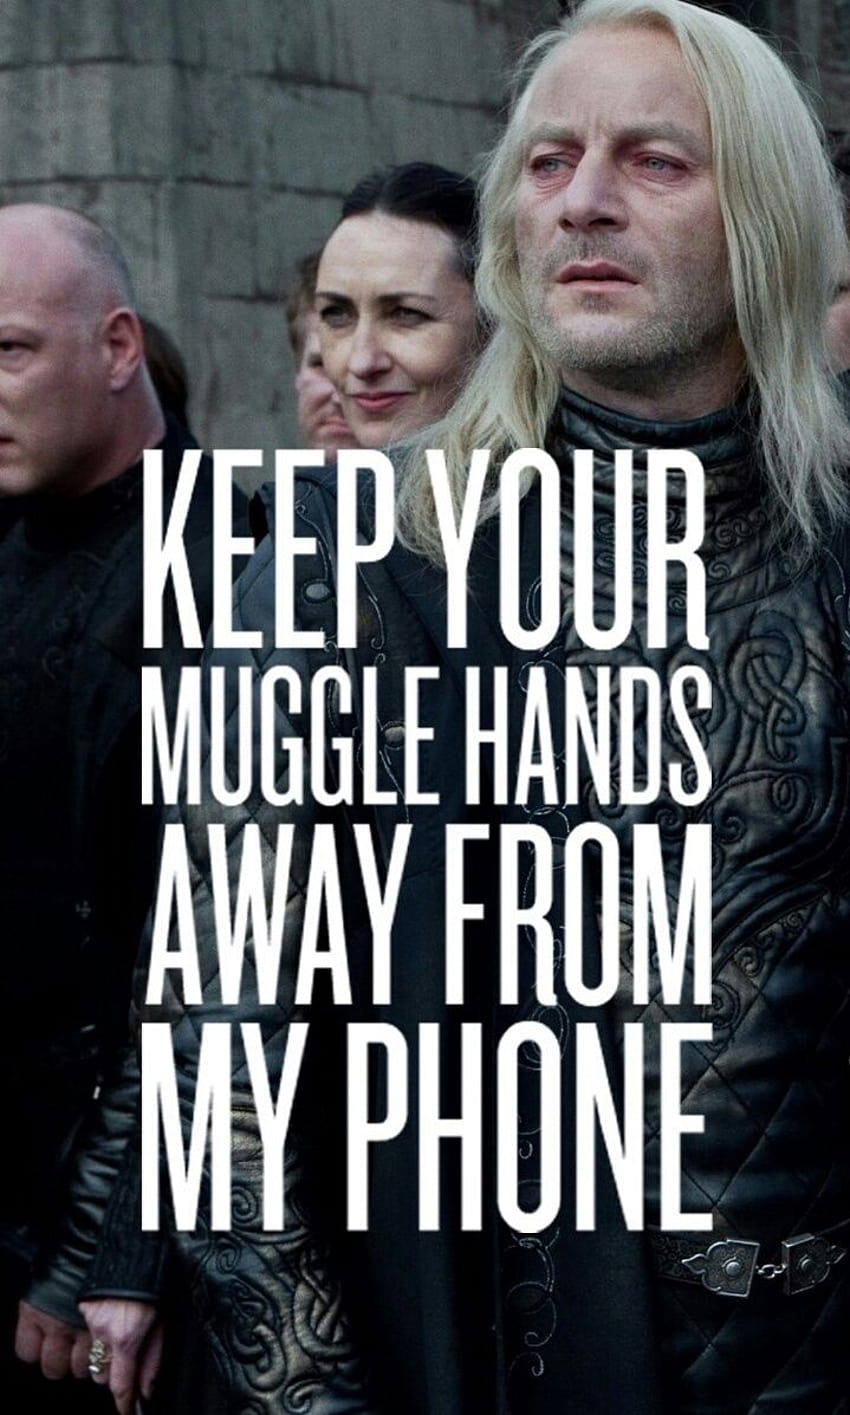 Keep your muggle hands away from my phone ♥, get away from my phone HD phone wallpaper